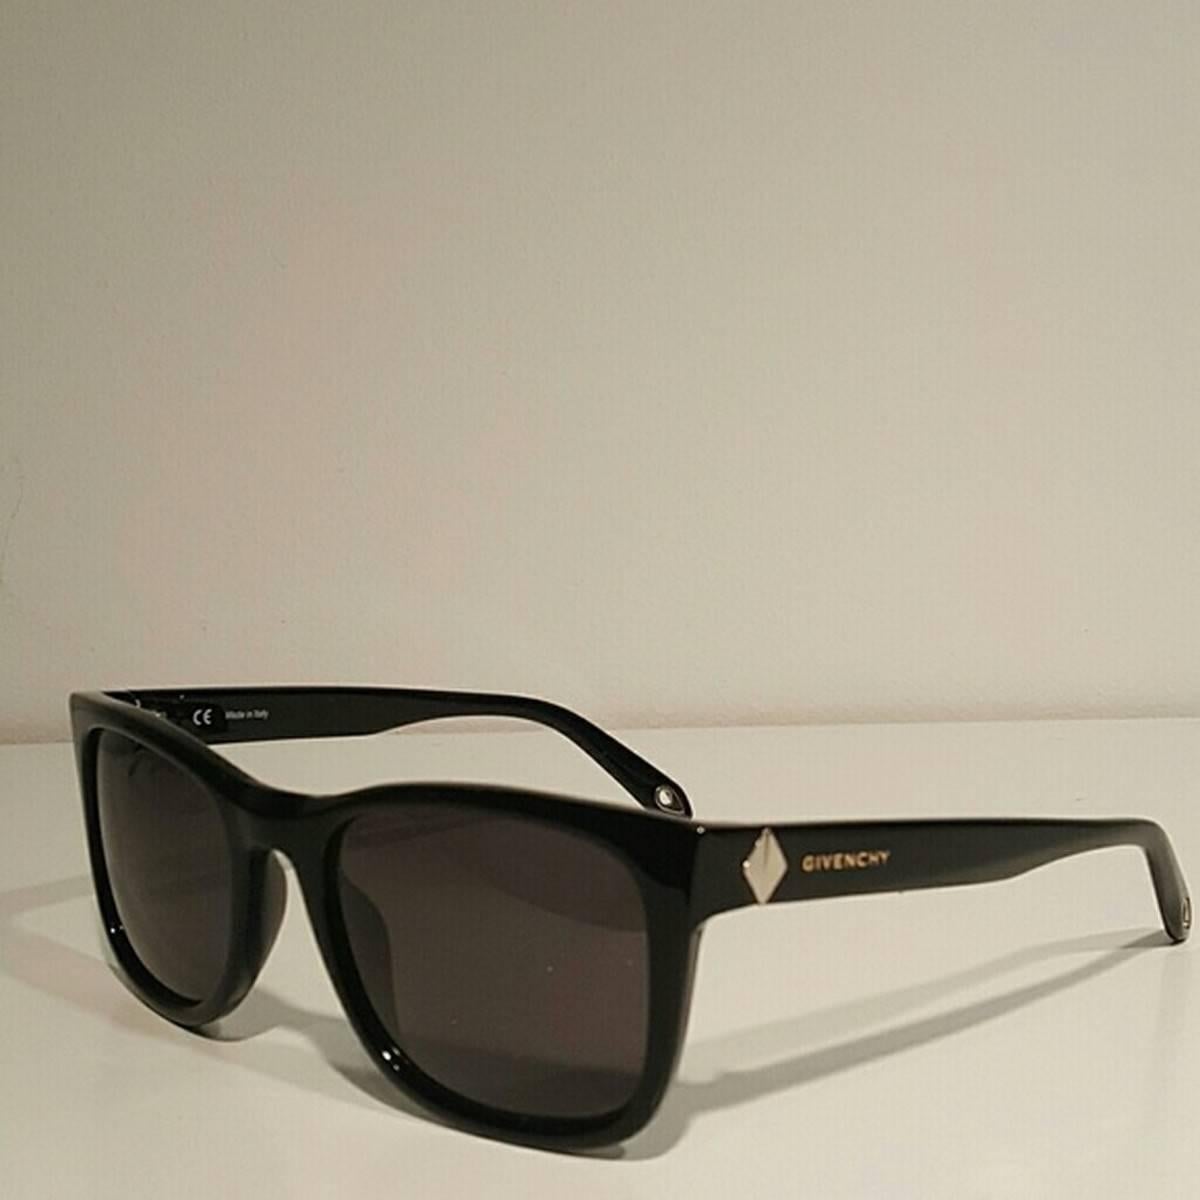 Givenchy Black Wayfarer Sunglasses
Color: Black
Size: OS

Brand new with box.
Unused condition.
No flaws.
Made in Italy.